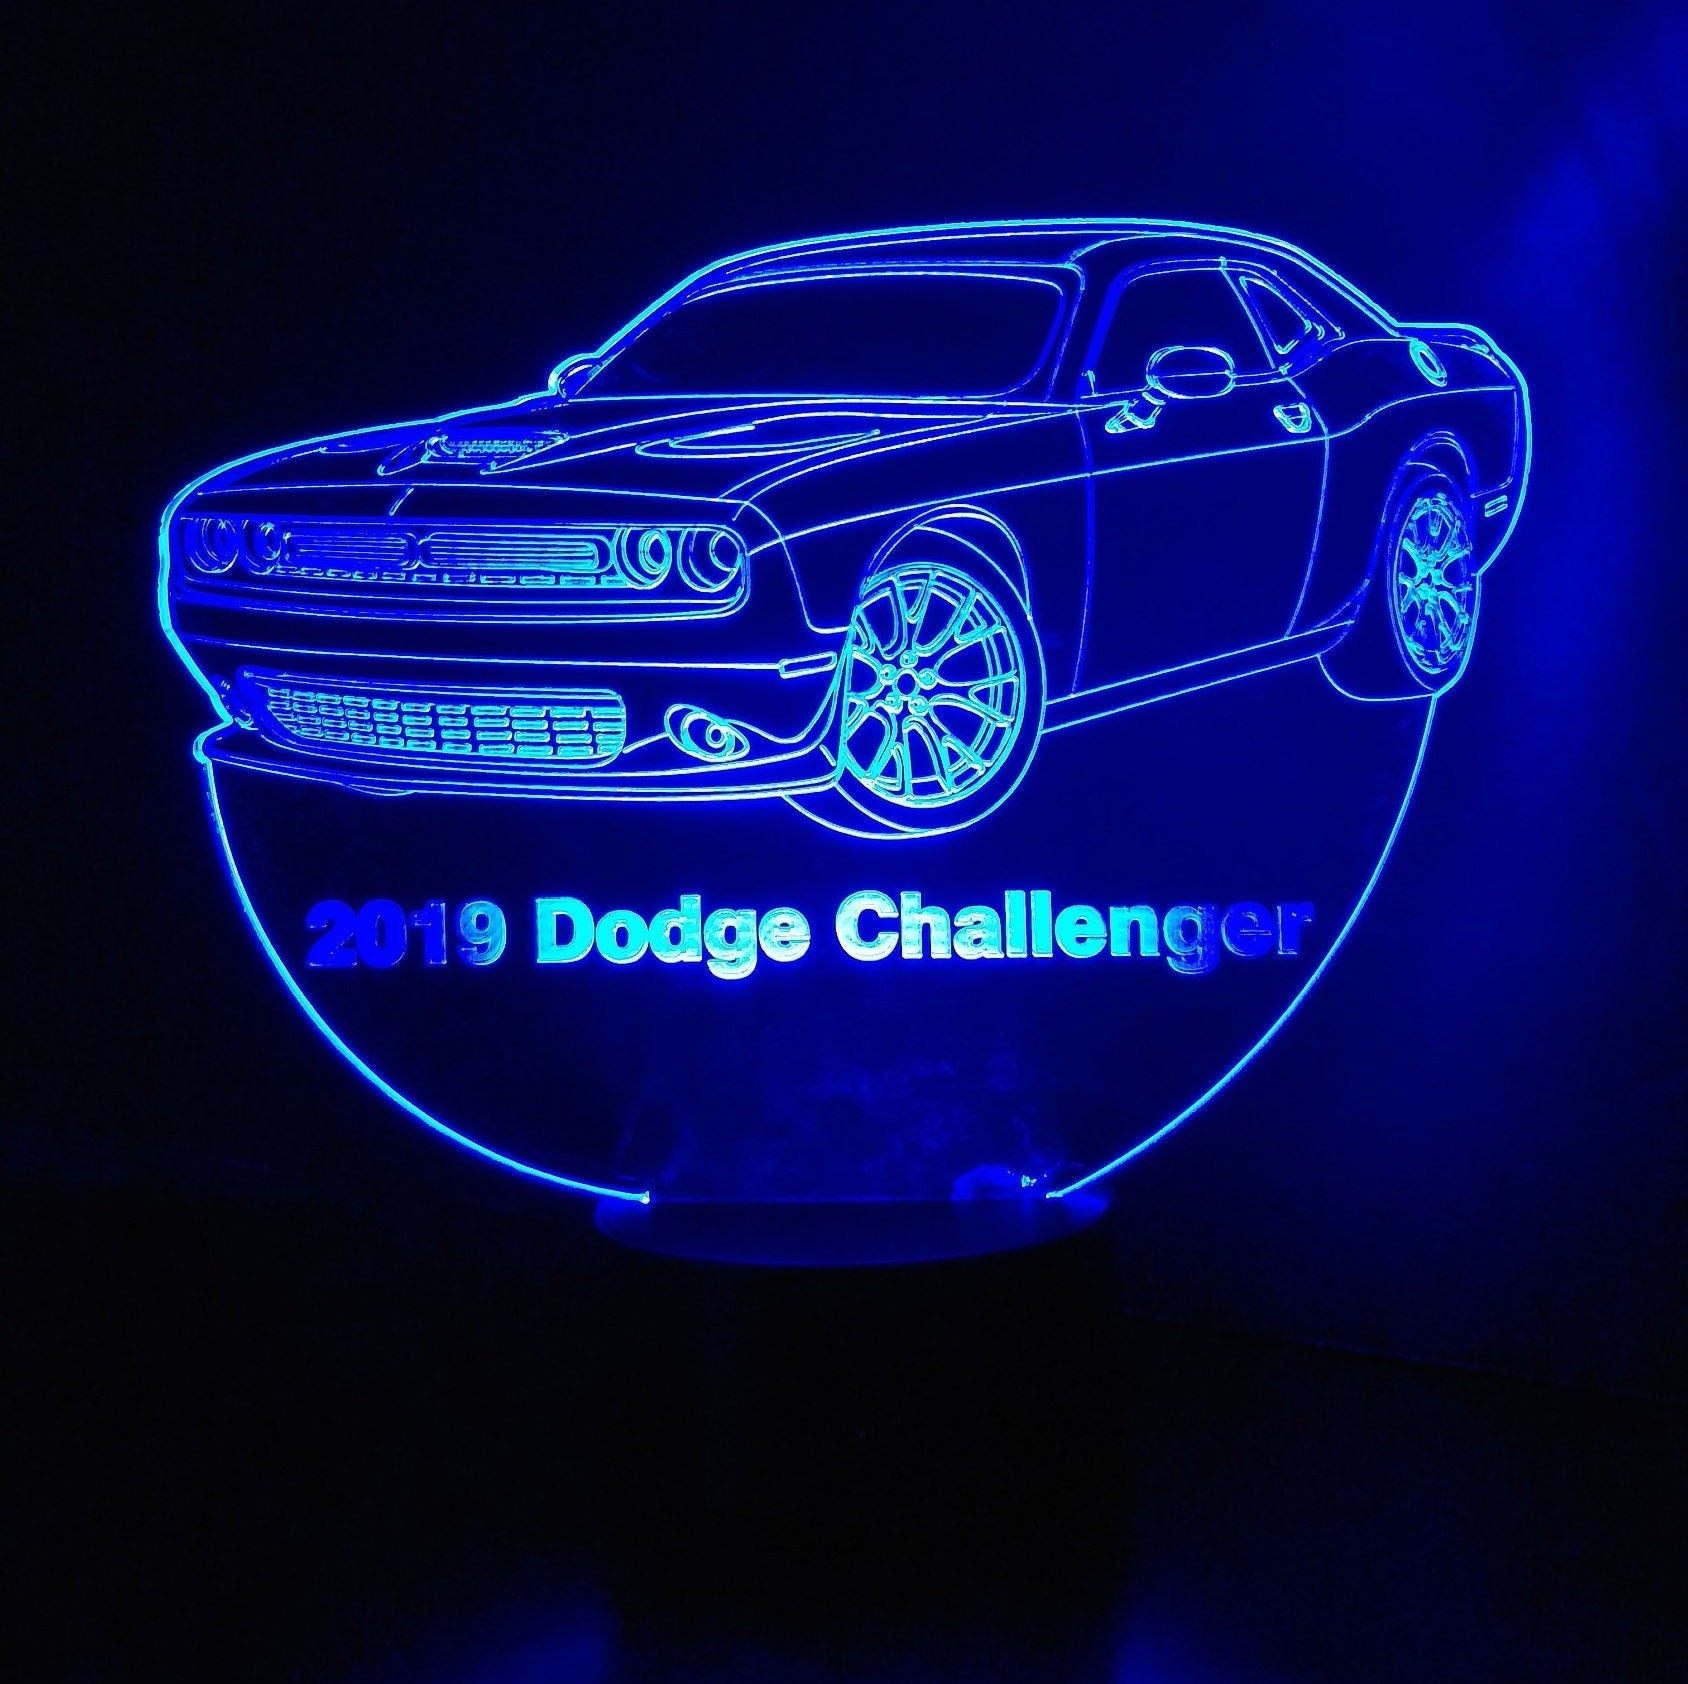 Awesome "Dodge Challenger" 3D LED Lamp (1208) - FREE Shipping!